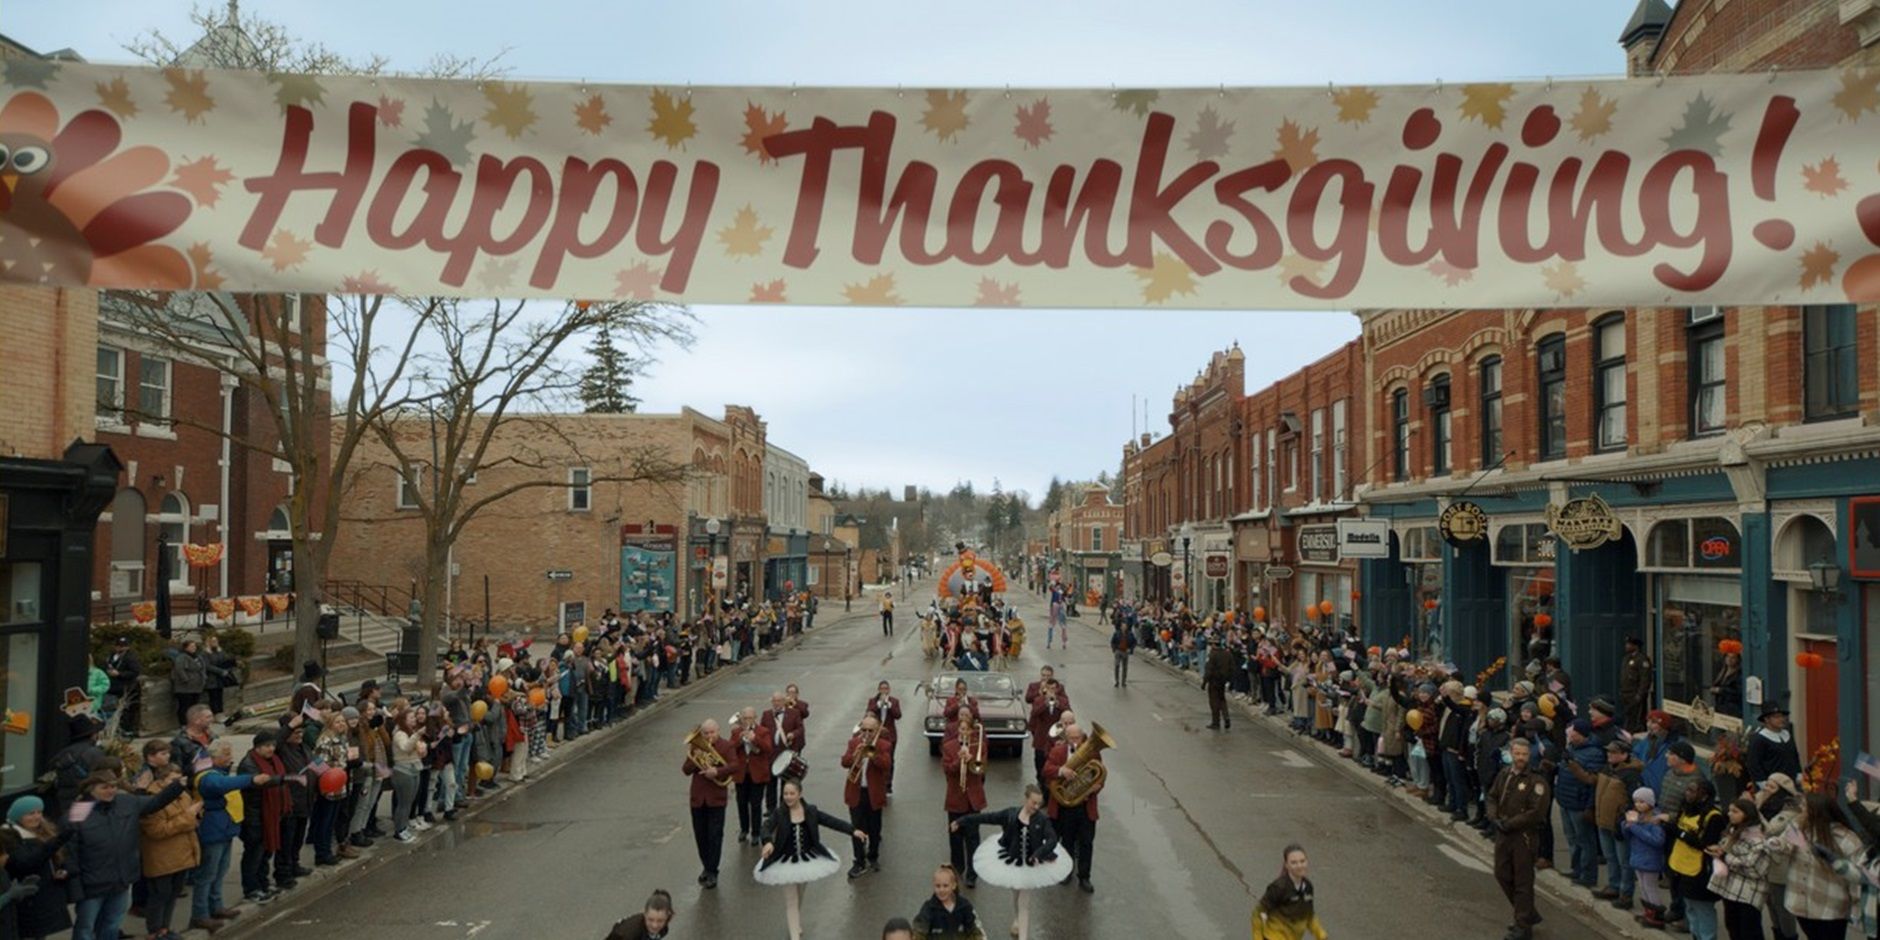 A Thanksgiving parade in Thanksgiving